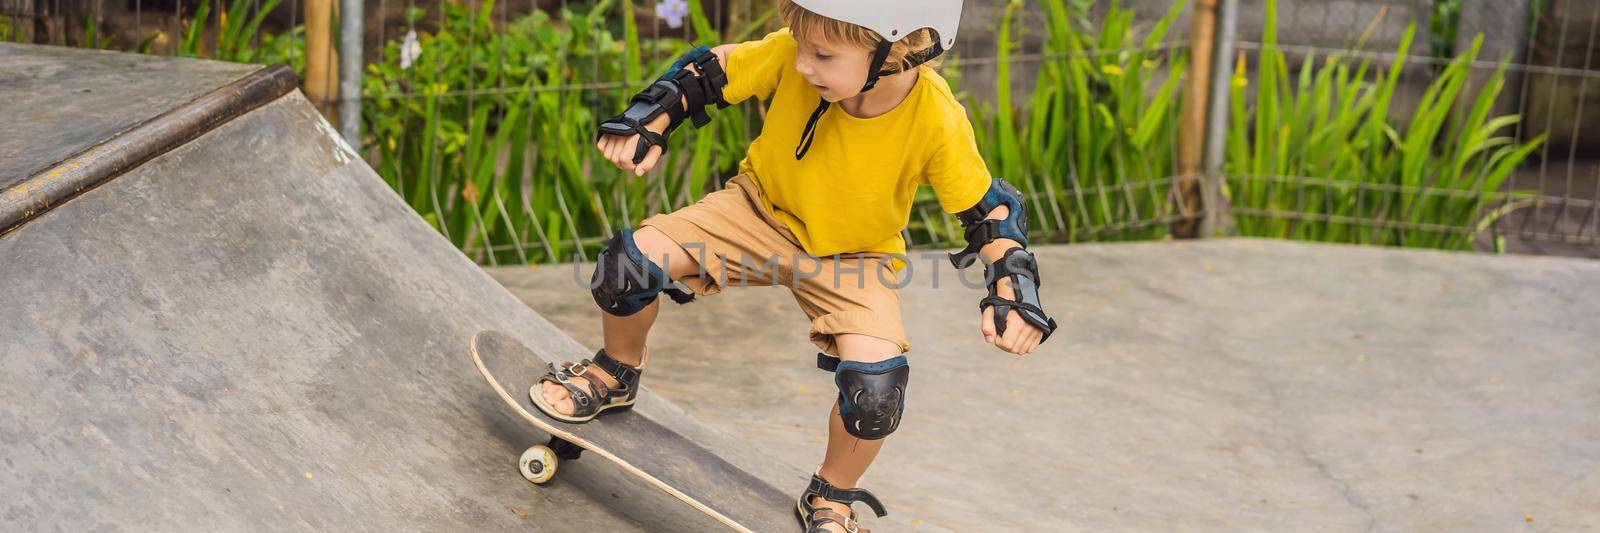 Athletic boy in helmet and knee pads learns to skateboard with in a skate park. Children education sports. BANNER, LONG FORMAT